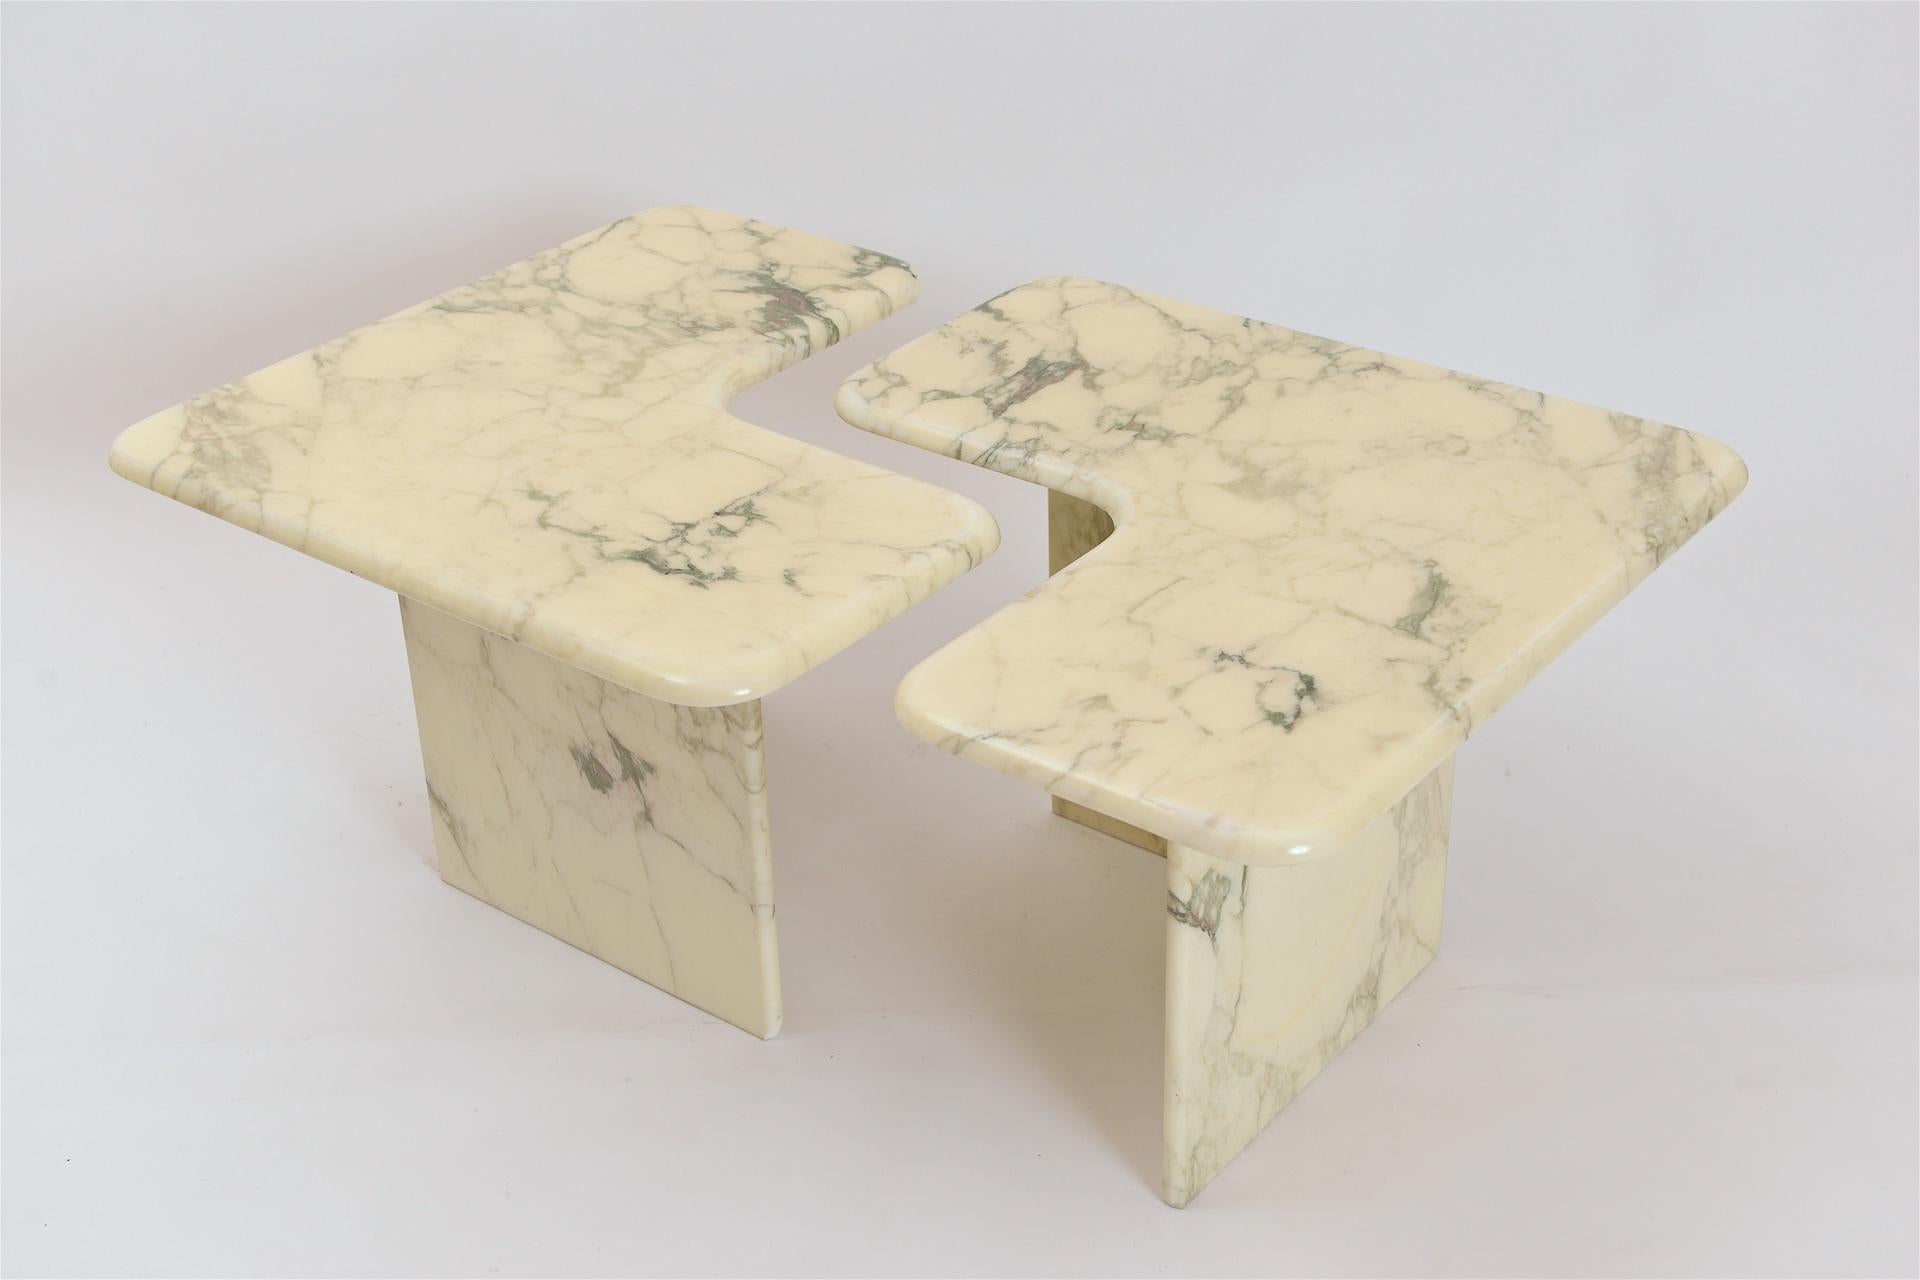 An extremely versatile pair of corner tables in a gorgeous off-white and grey/green color Calacatta marble. Manufactured in the 1980s, these tables can be positioned together, in a rectangular formation with an ‘s’ shaped gap, or separately,